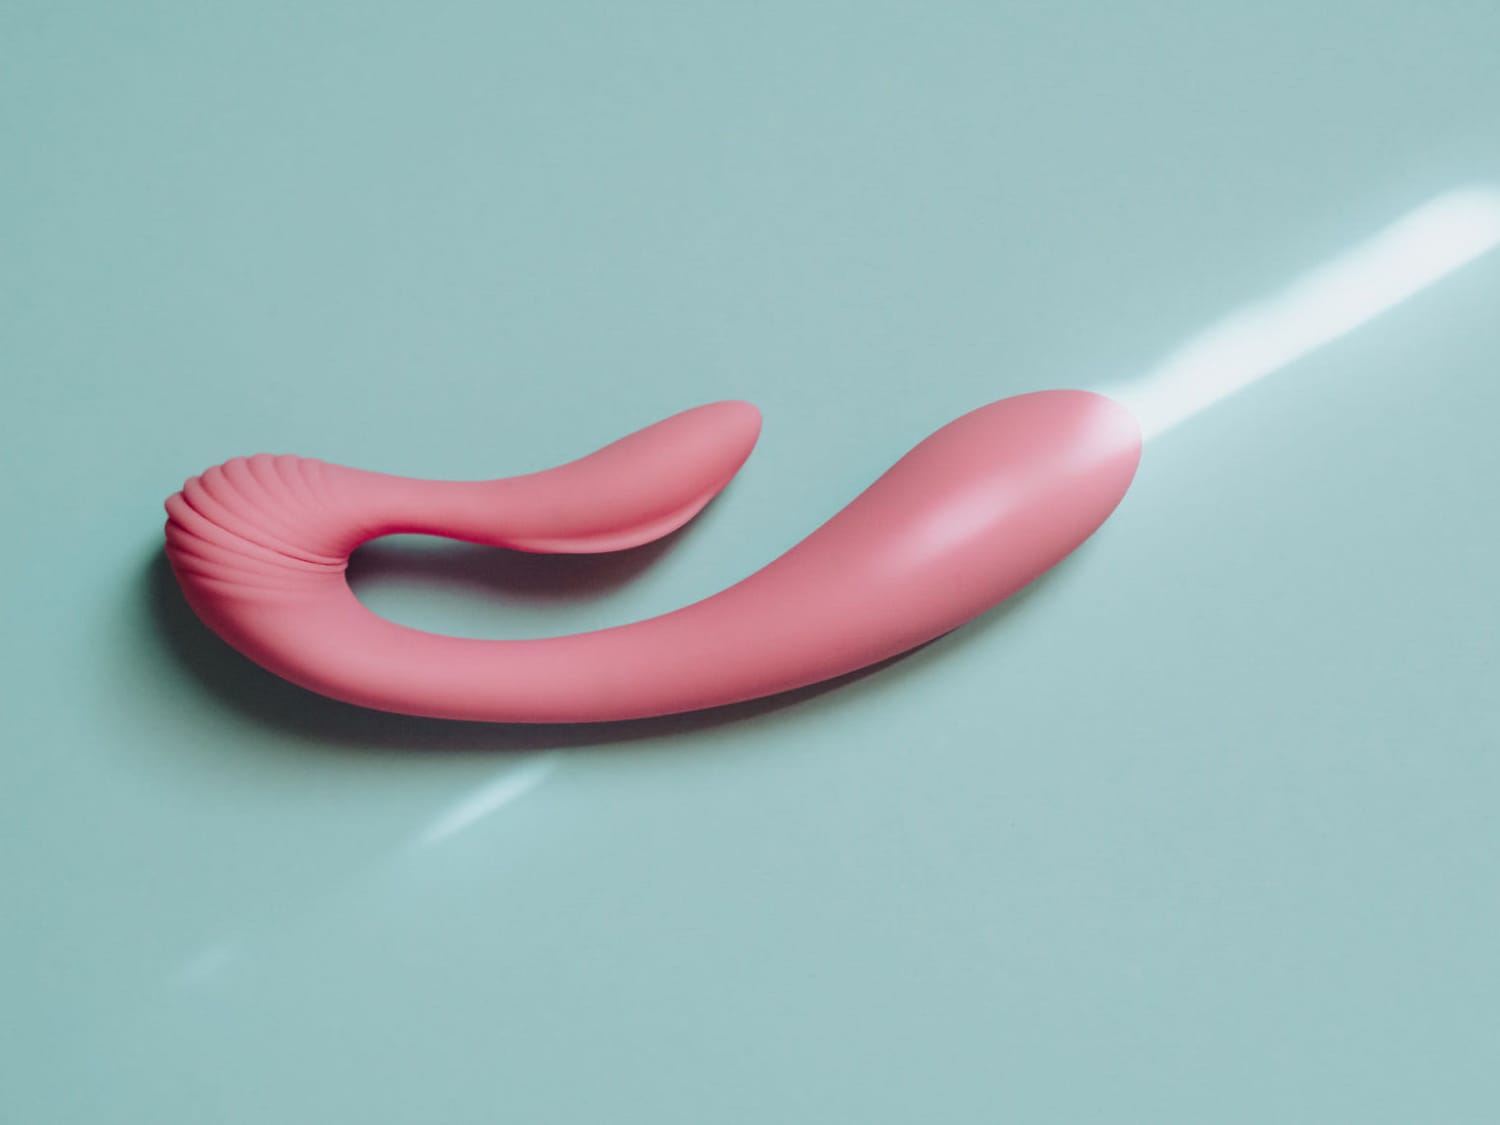 How to Wash Dildos and Sex Toys, According to Experts Apartment Therapy